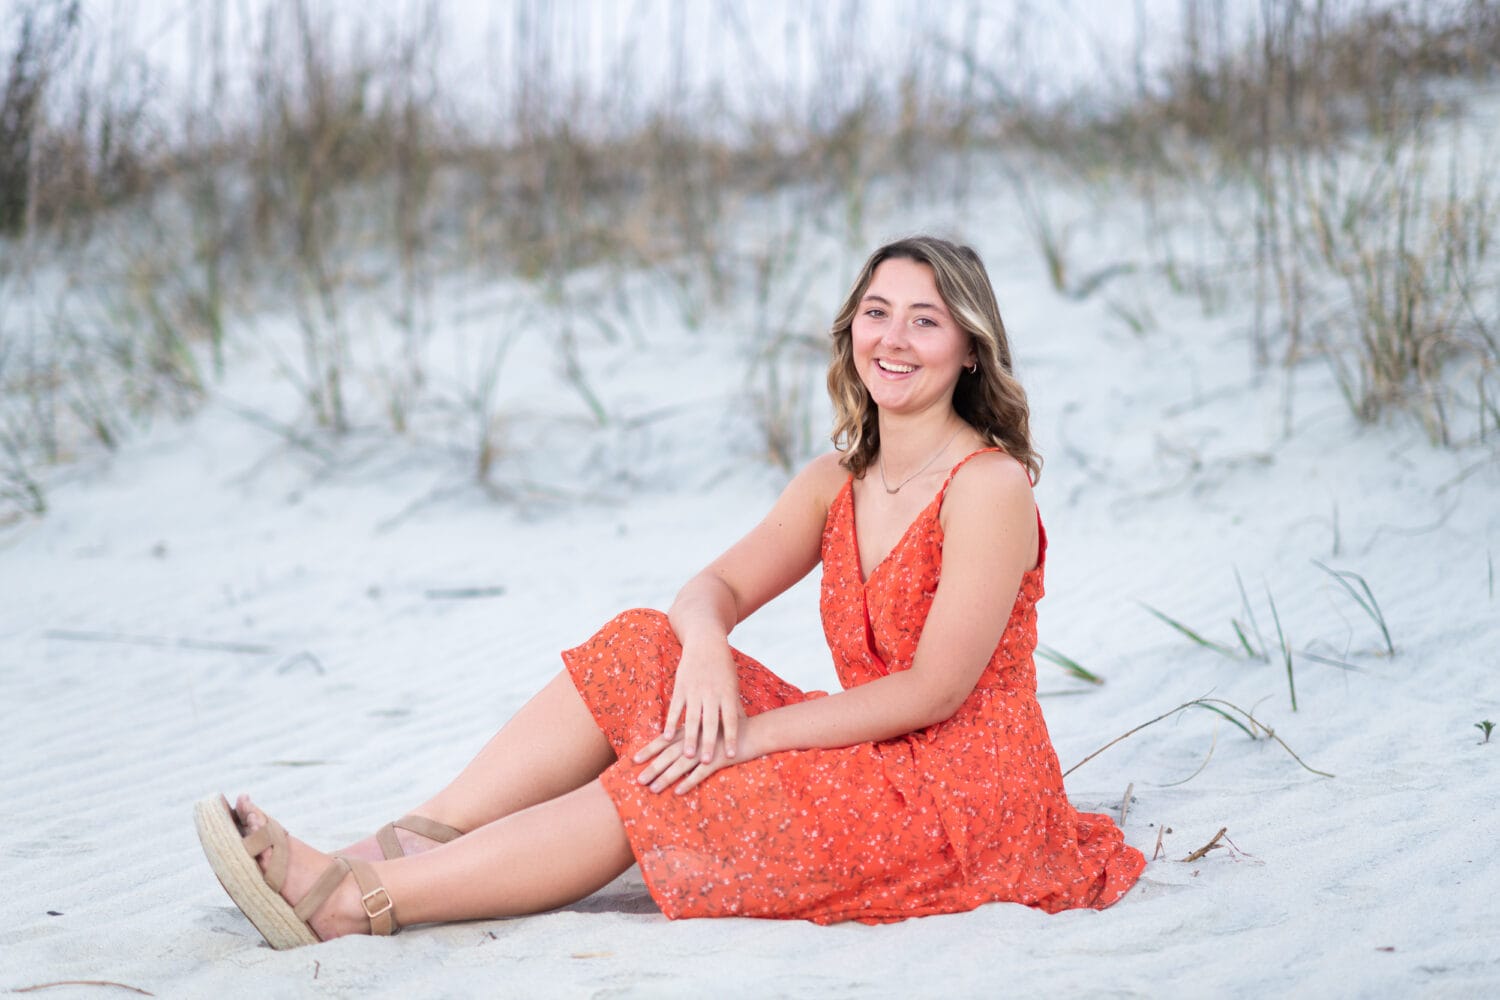 Big smile by the dunes - Huntington Beach State Park